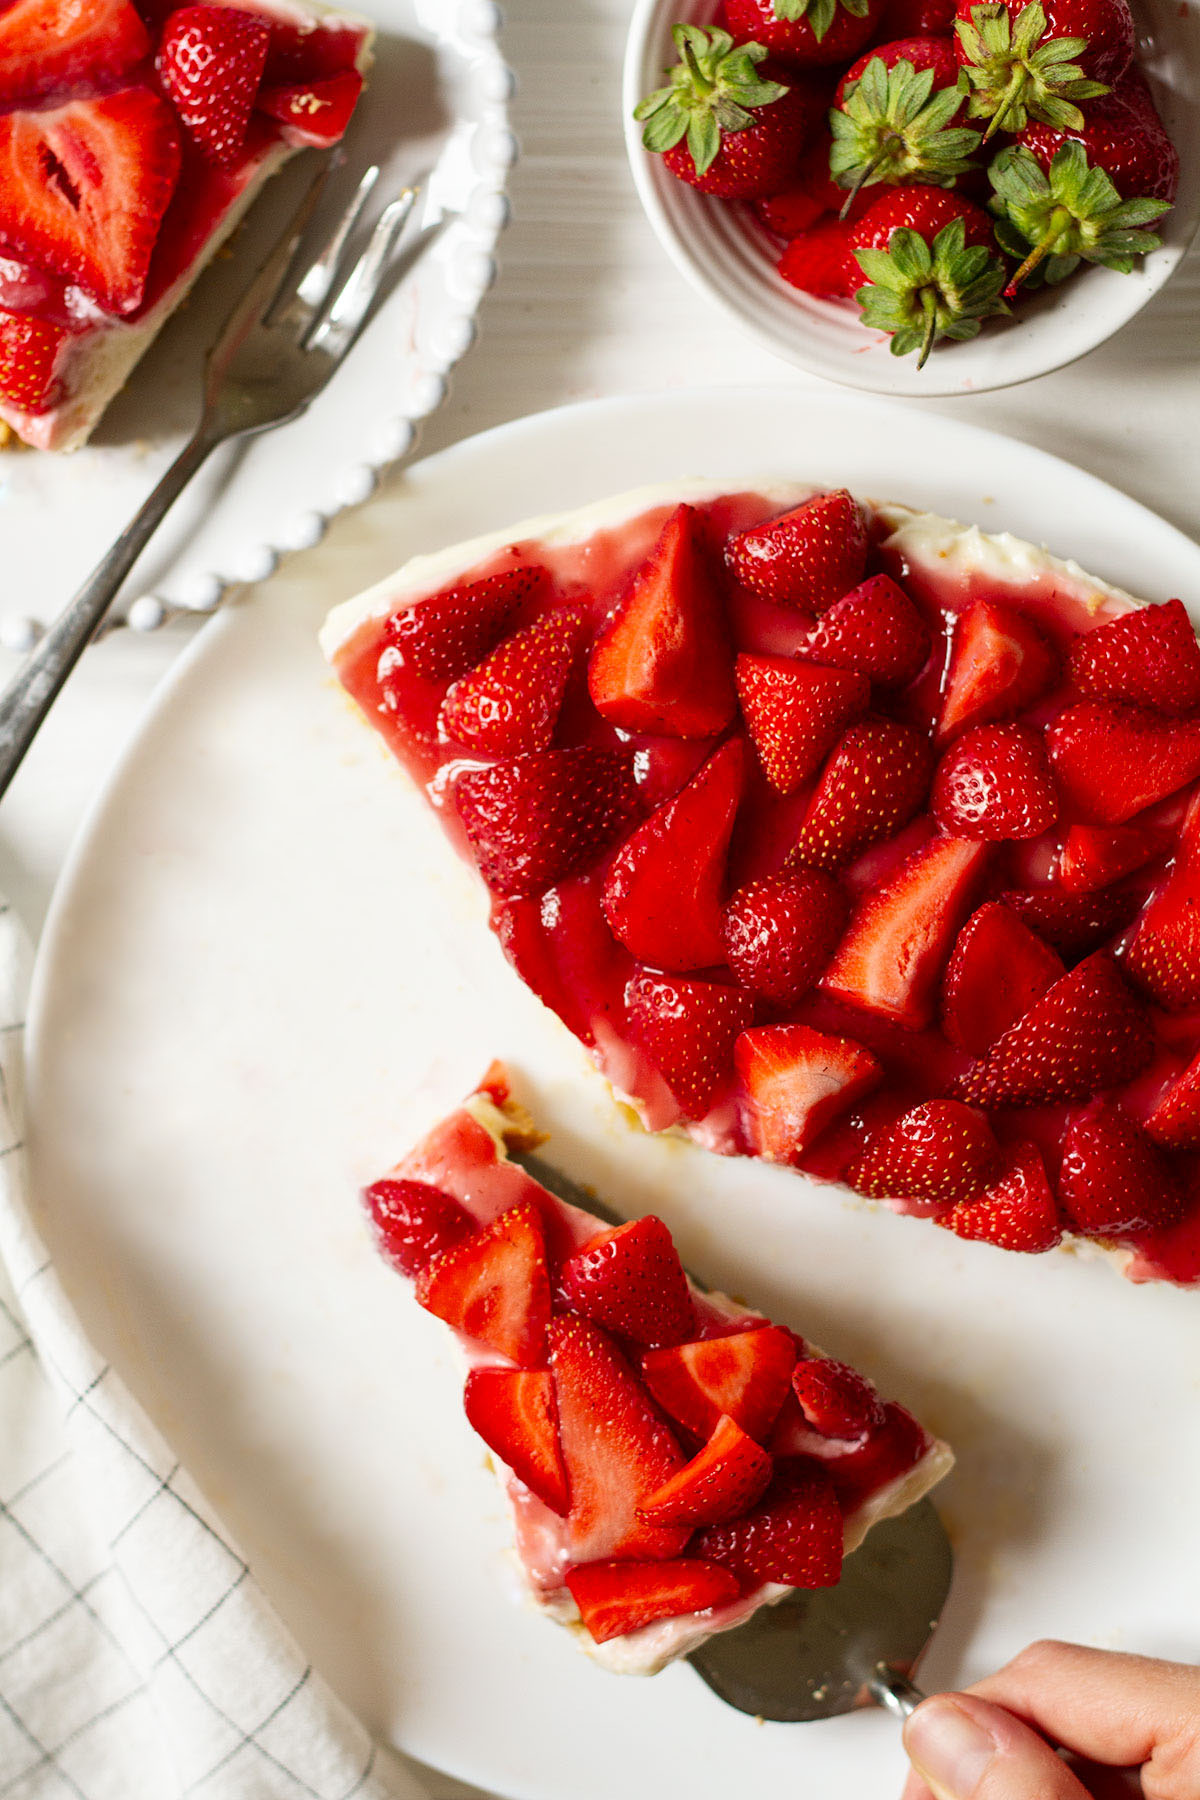 No Bake Strawberry Cheesecake served on a white plate with a side of whole strawberries.